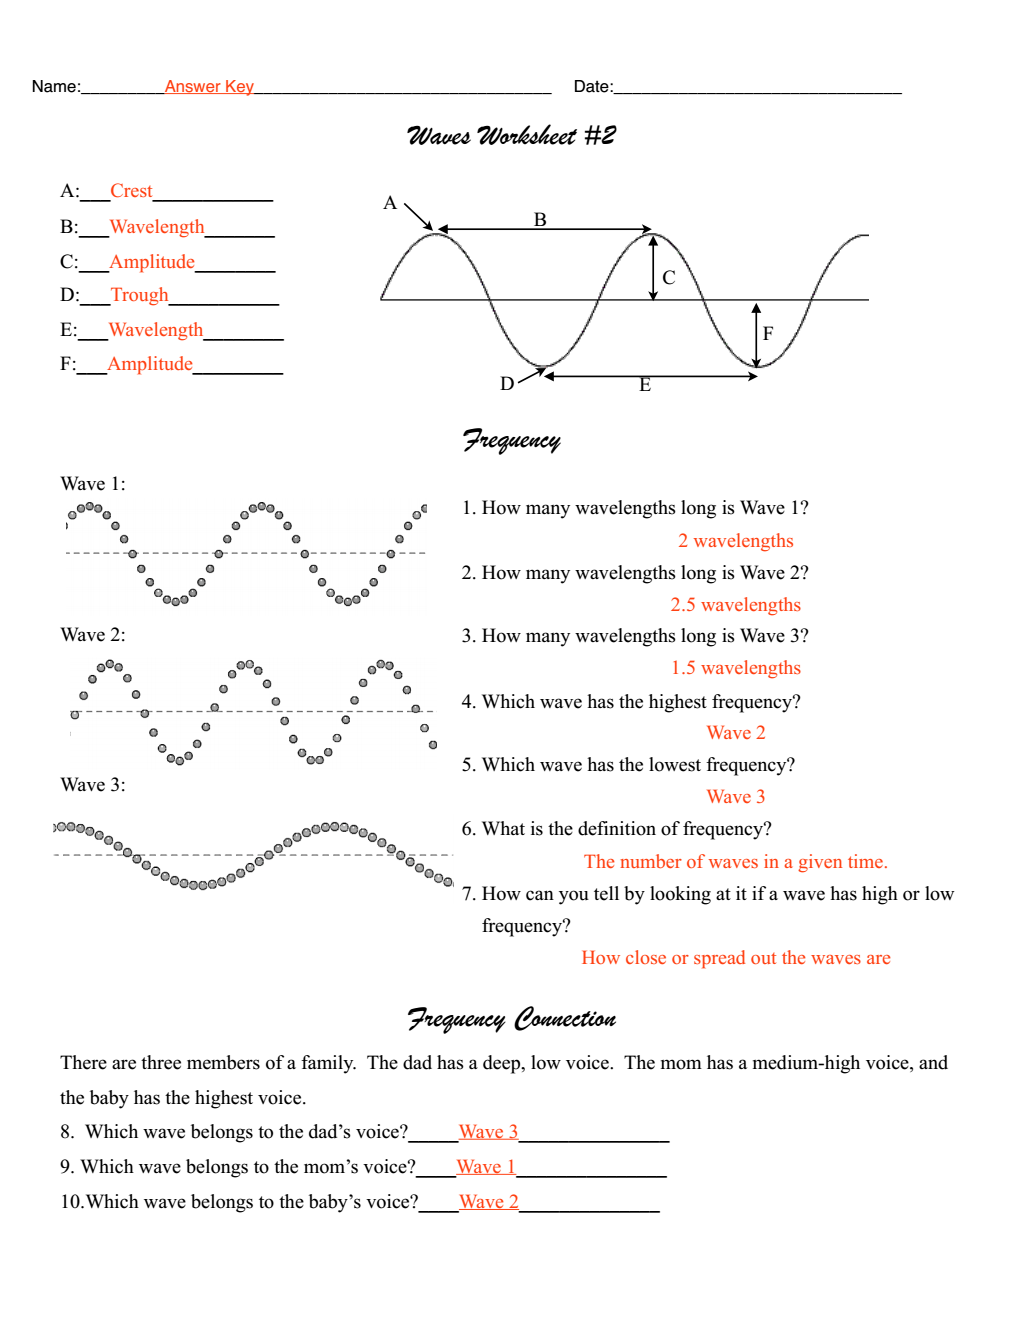 Waves Worksheet Answers